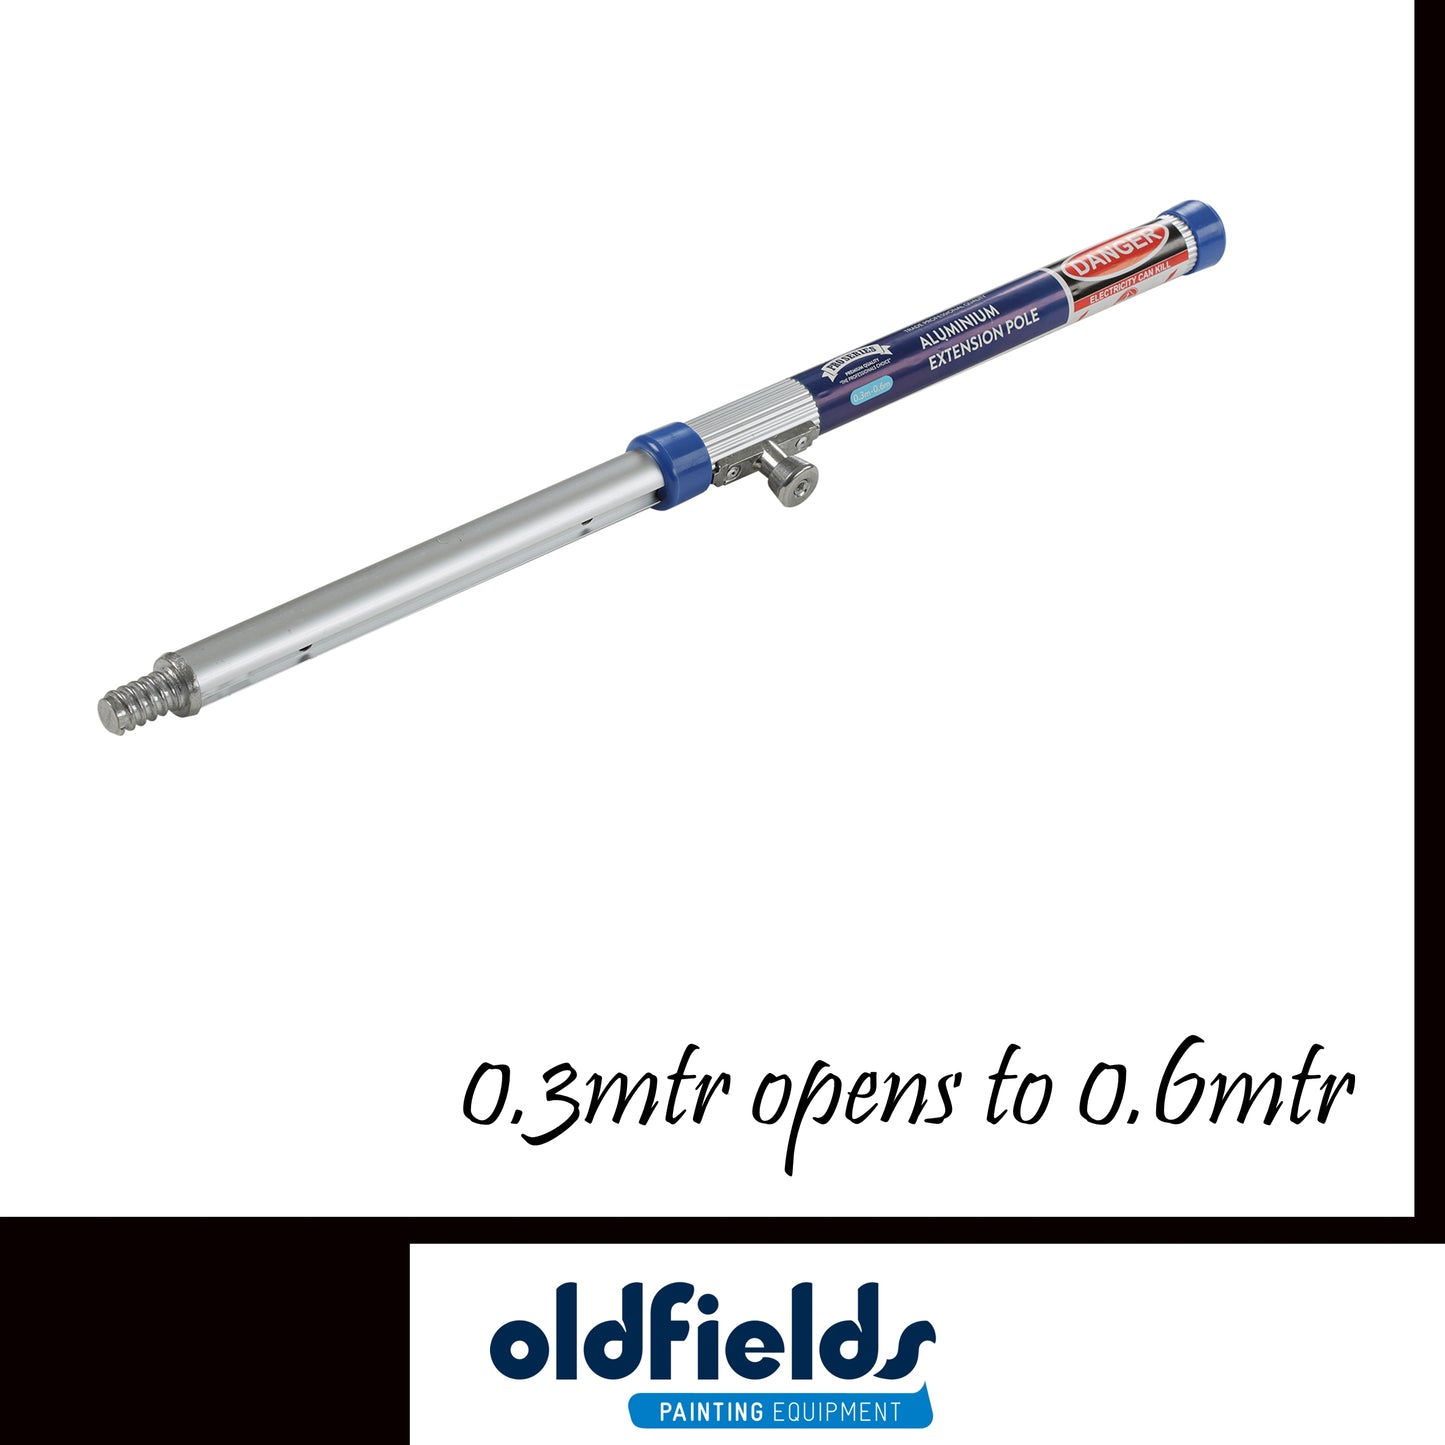 Pro series Aluminium Extension Poles 0.3mtr - 0.6mtr from Oldfields